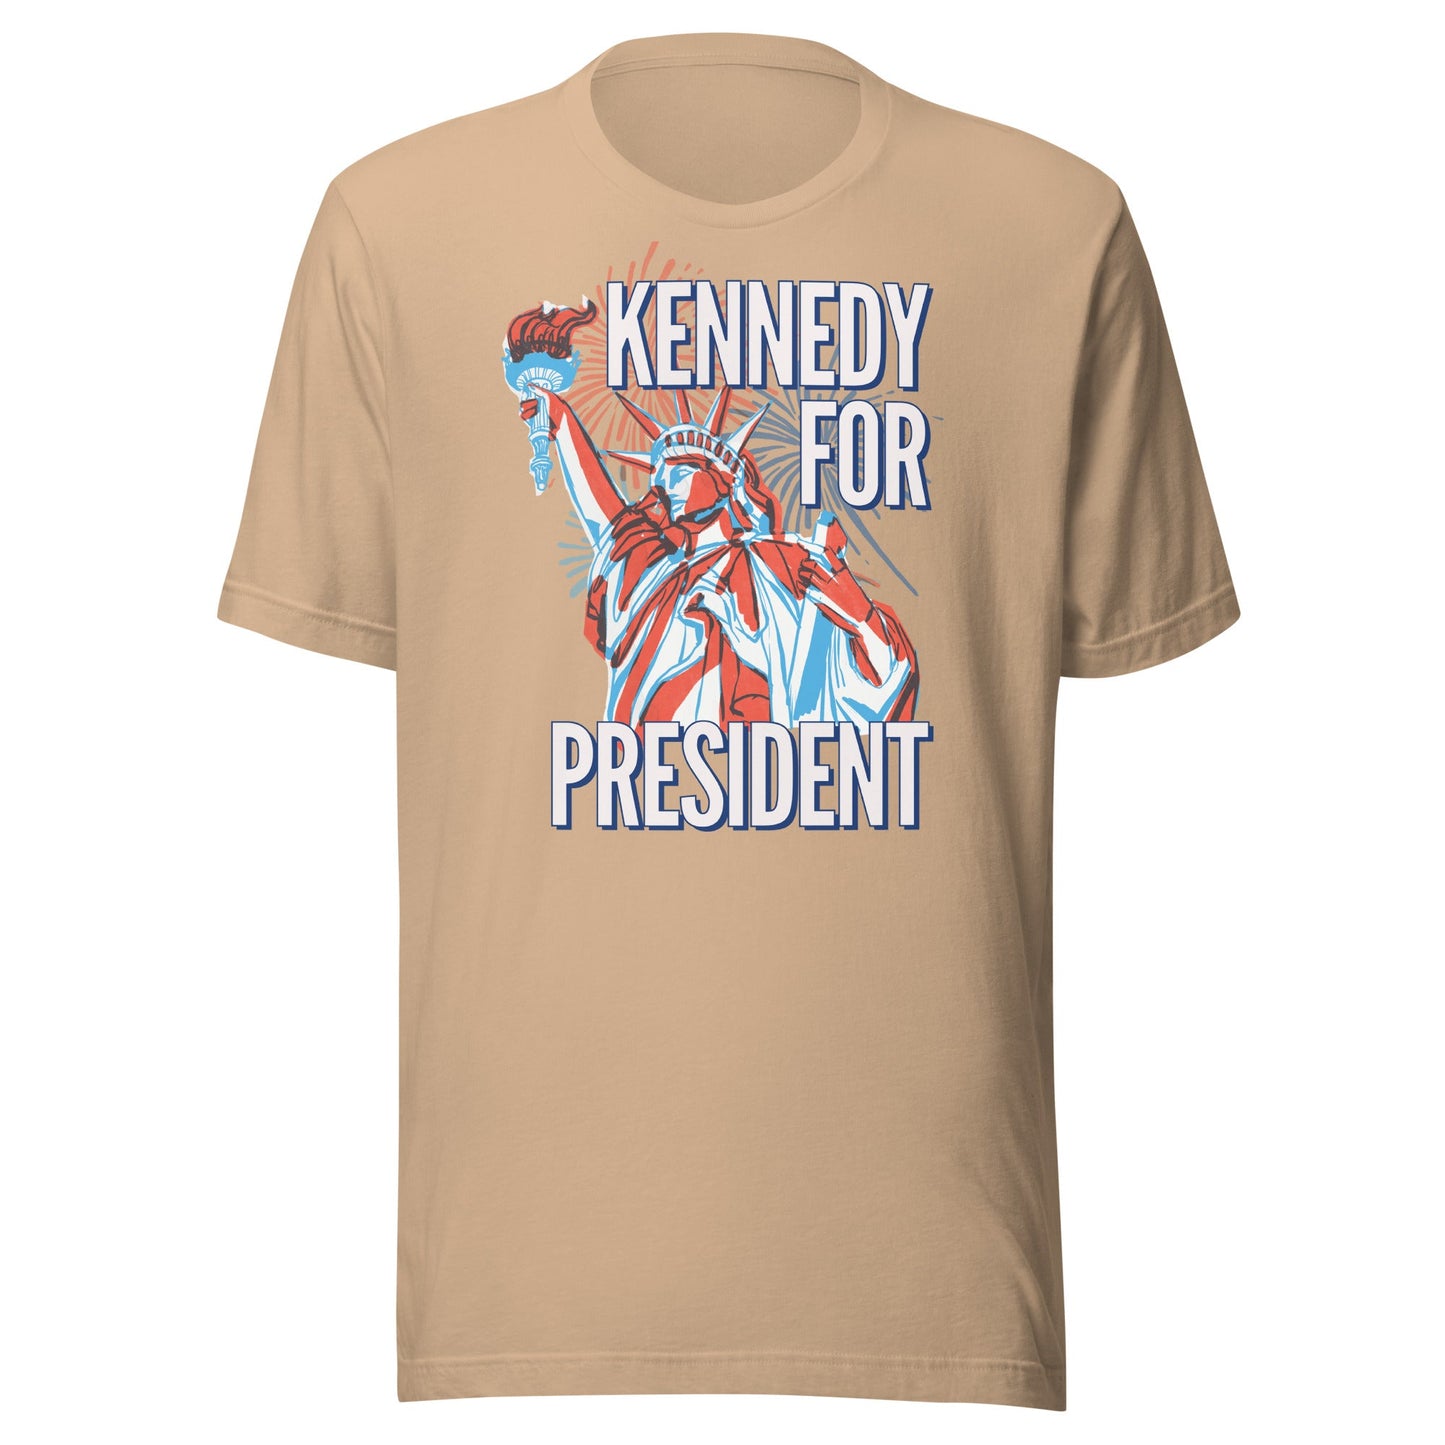 Kennedy for Liberty Unisex Tee - TEAM KENNEDY. All rights reserved